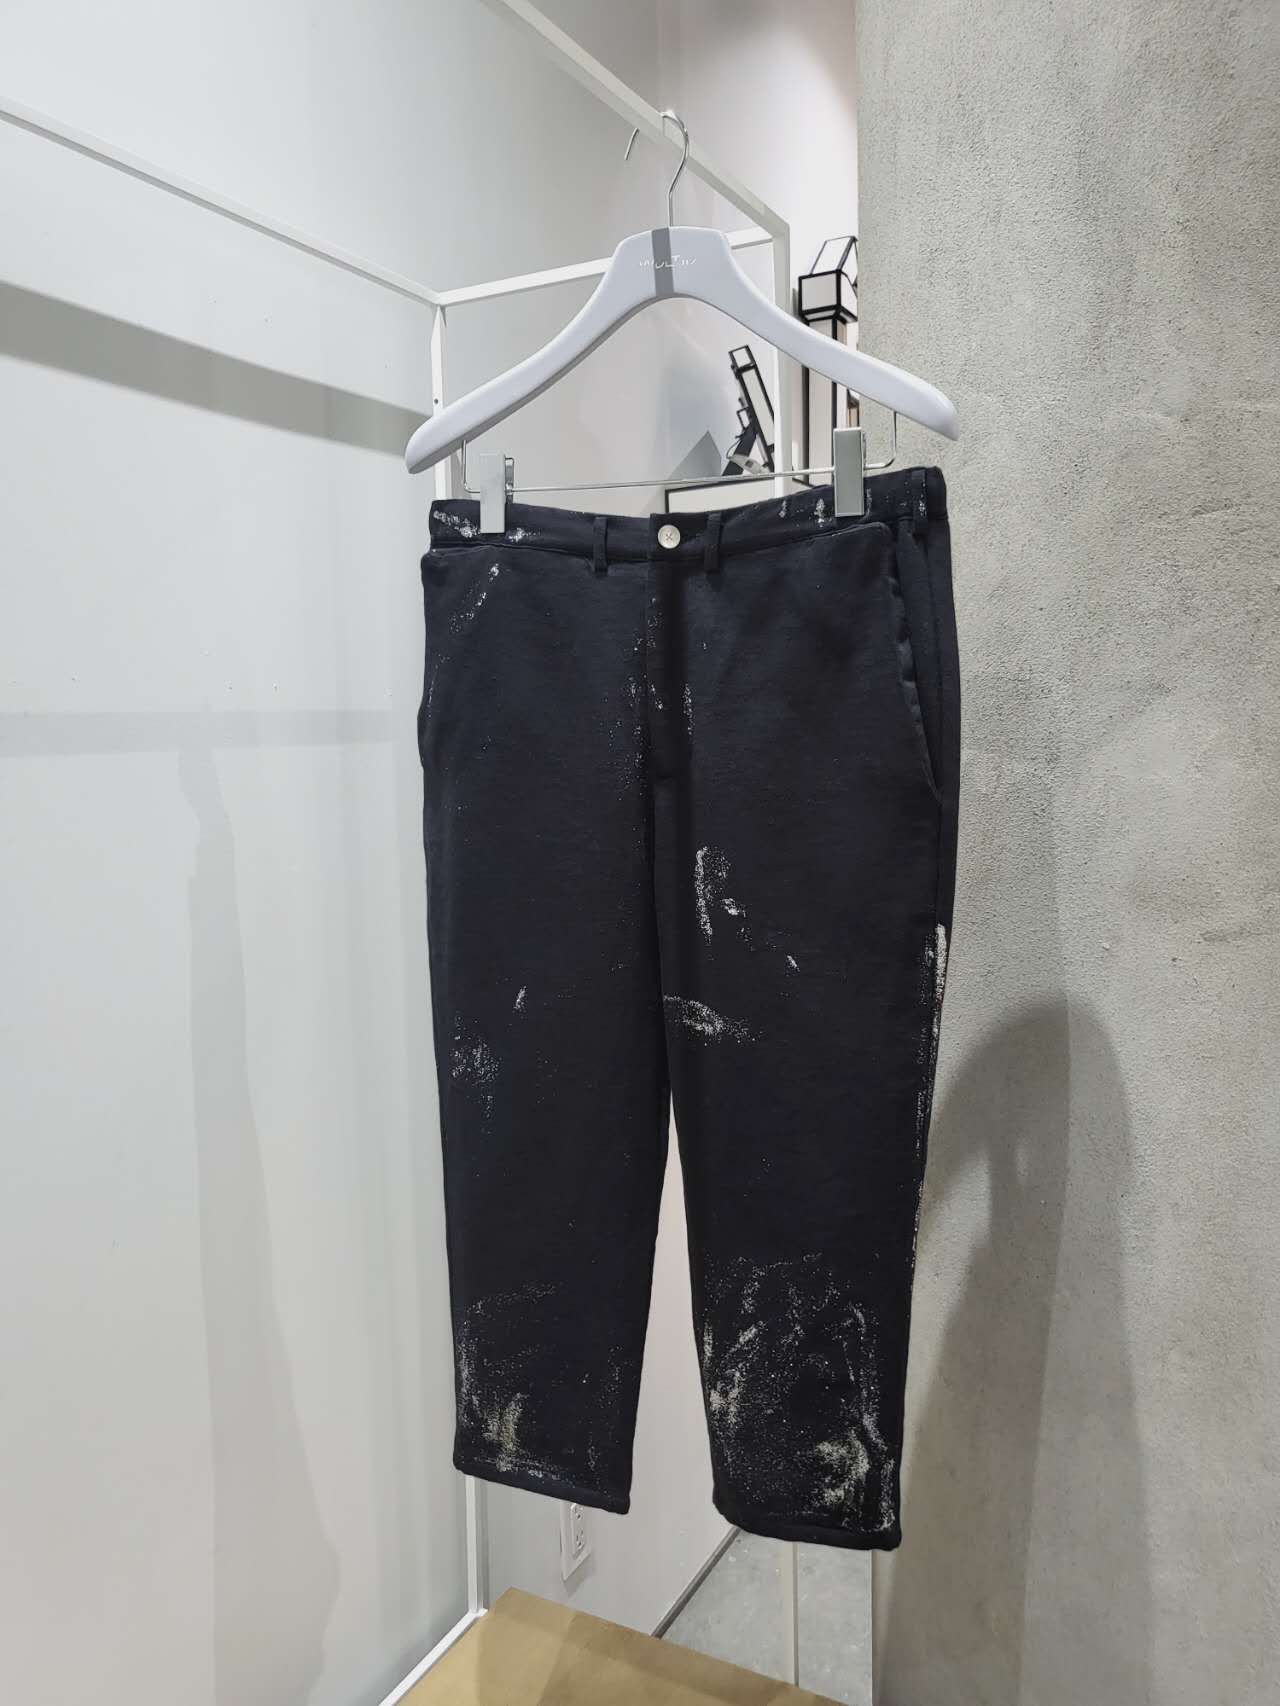 Sagittaire A - Glitter Cropped Pants